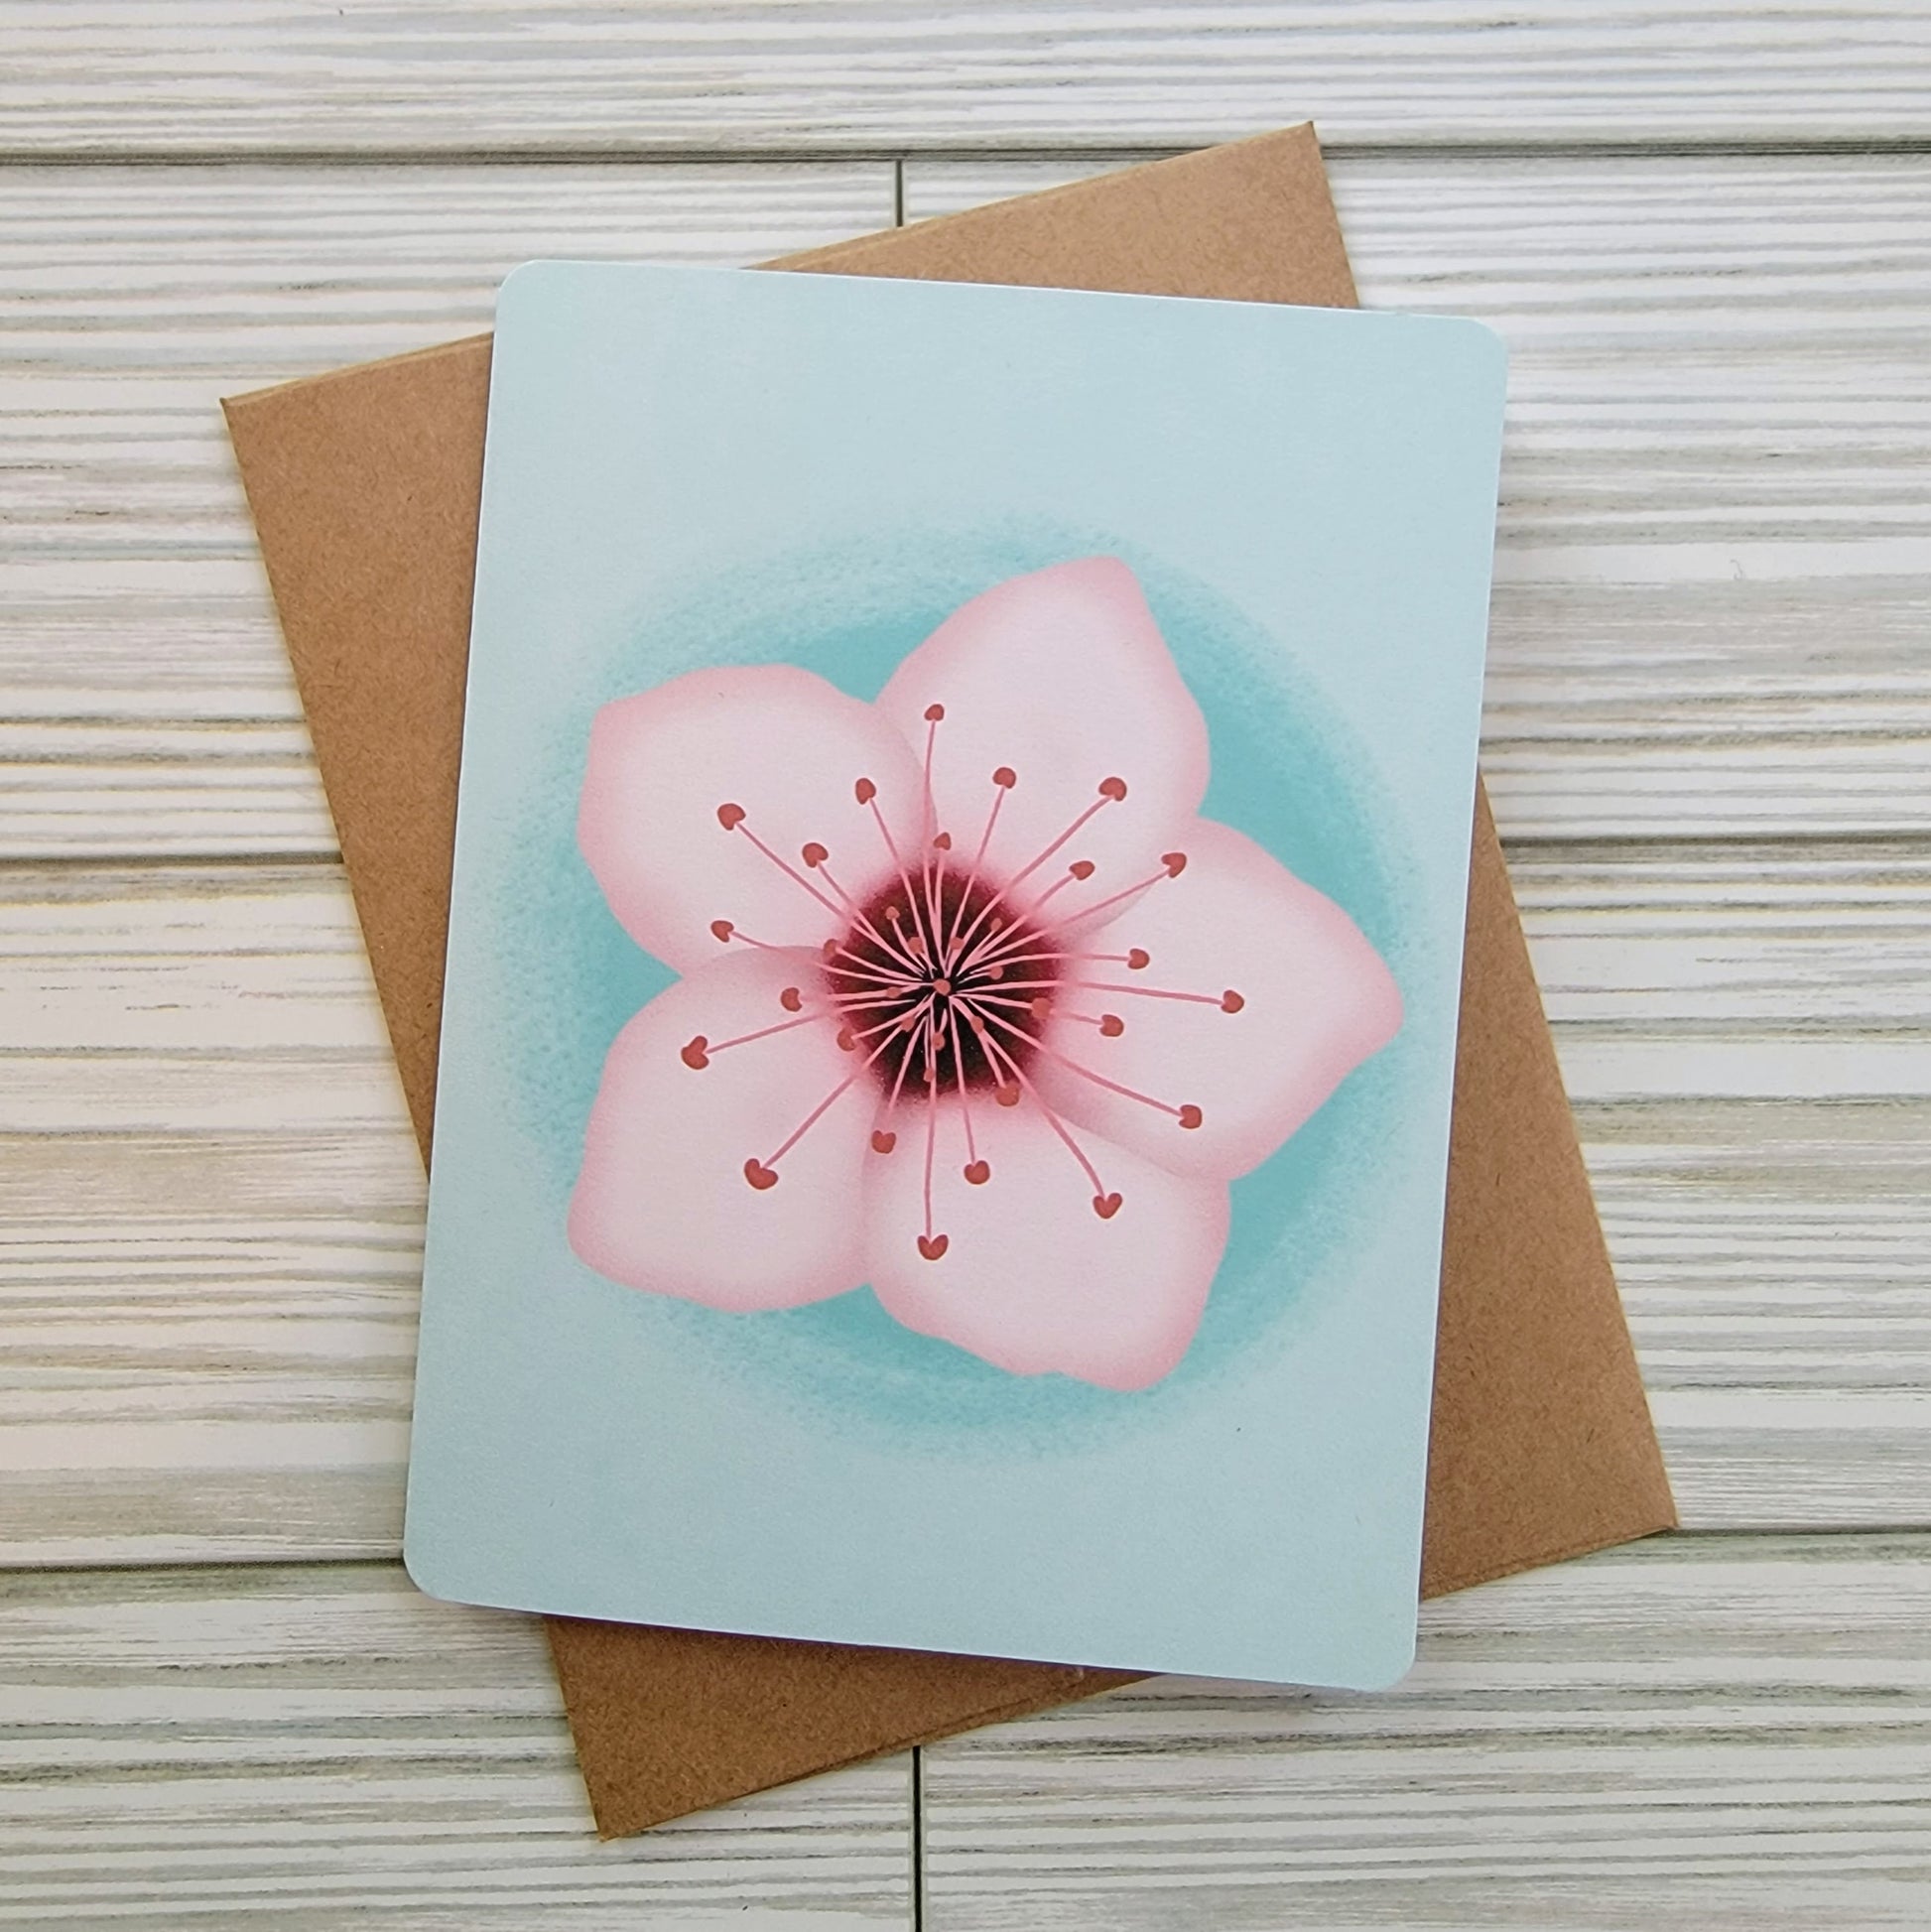 Cherry Blossom Handmade Greeting Card - Recycled Paper and Kraft Envelope - Overhead Shot